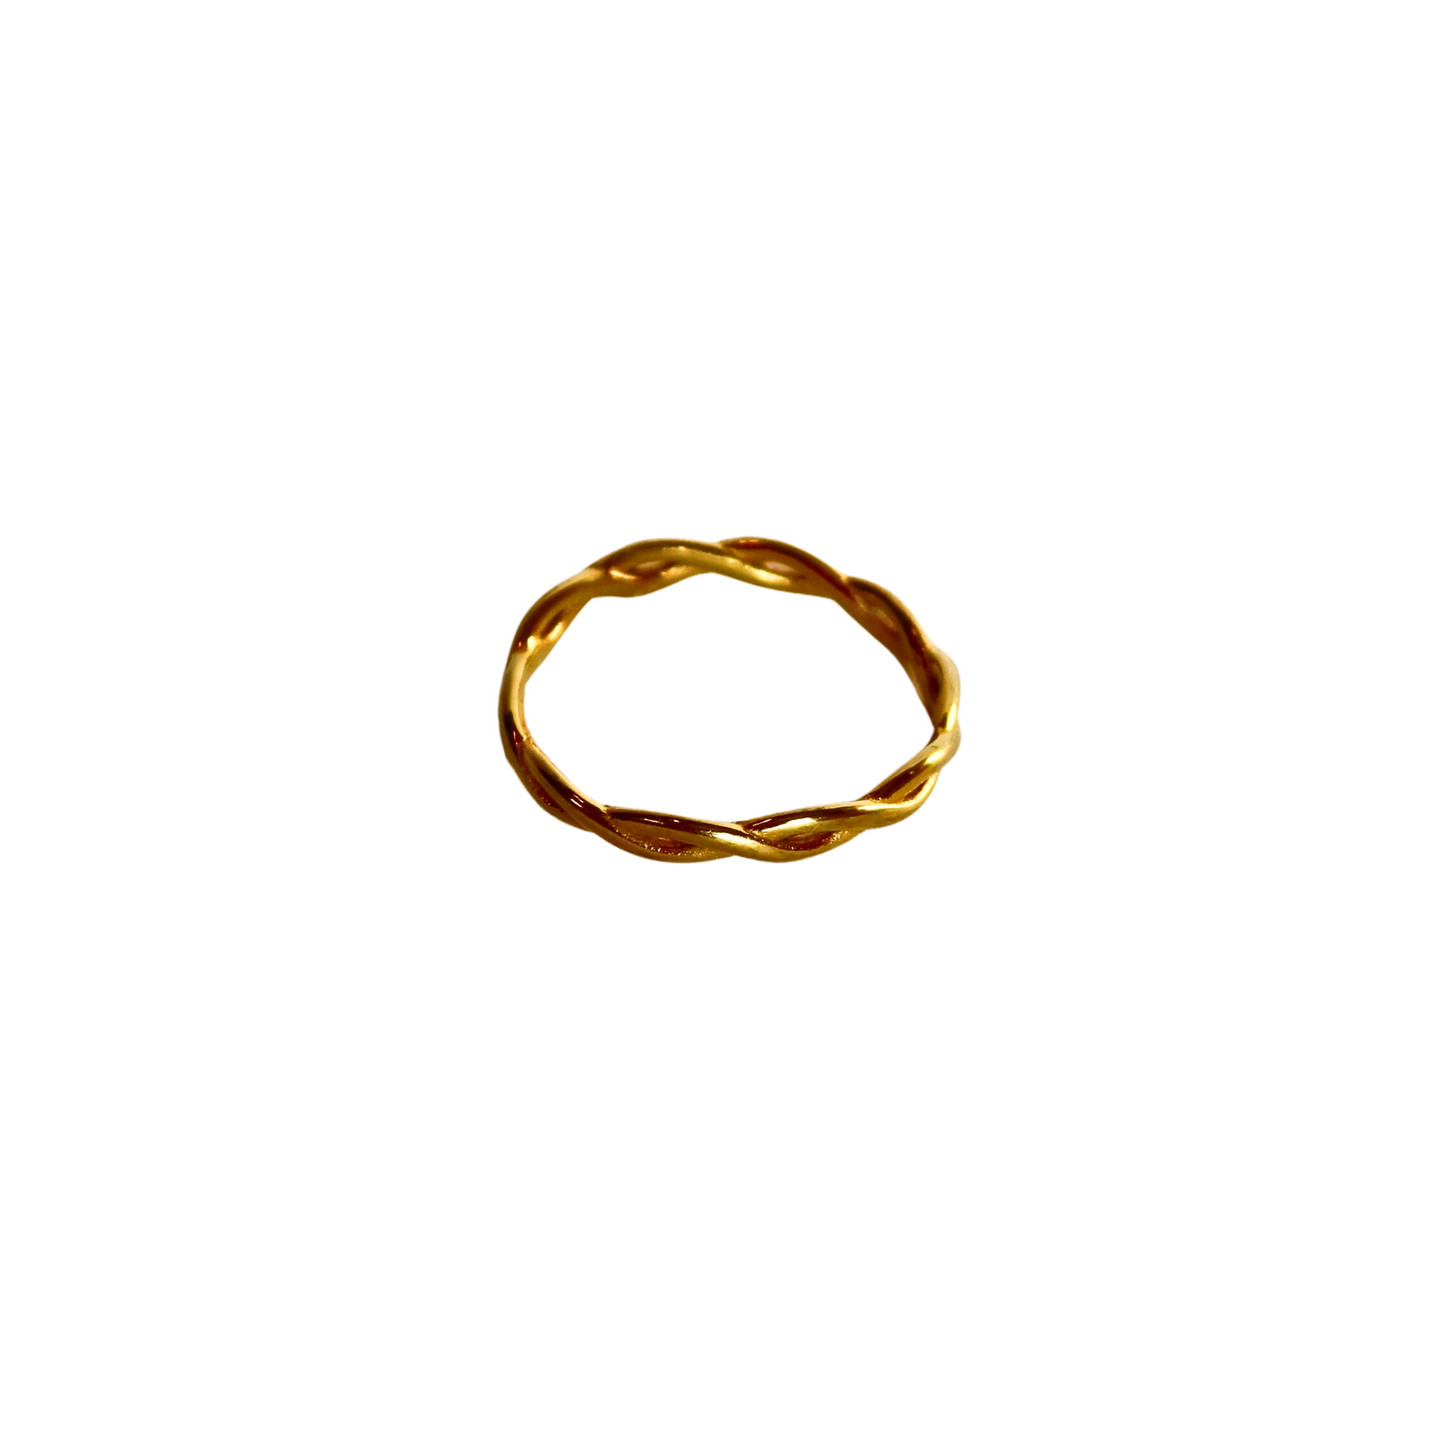 Rose Ring from ShopEternidad.com Affordable 18K Gold Plated Jewelry